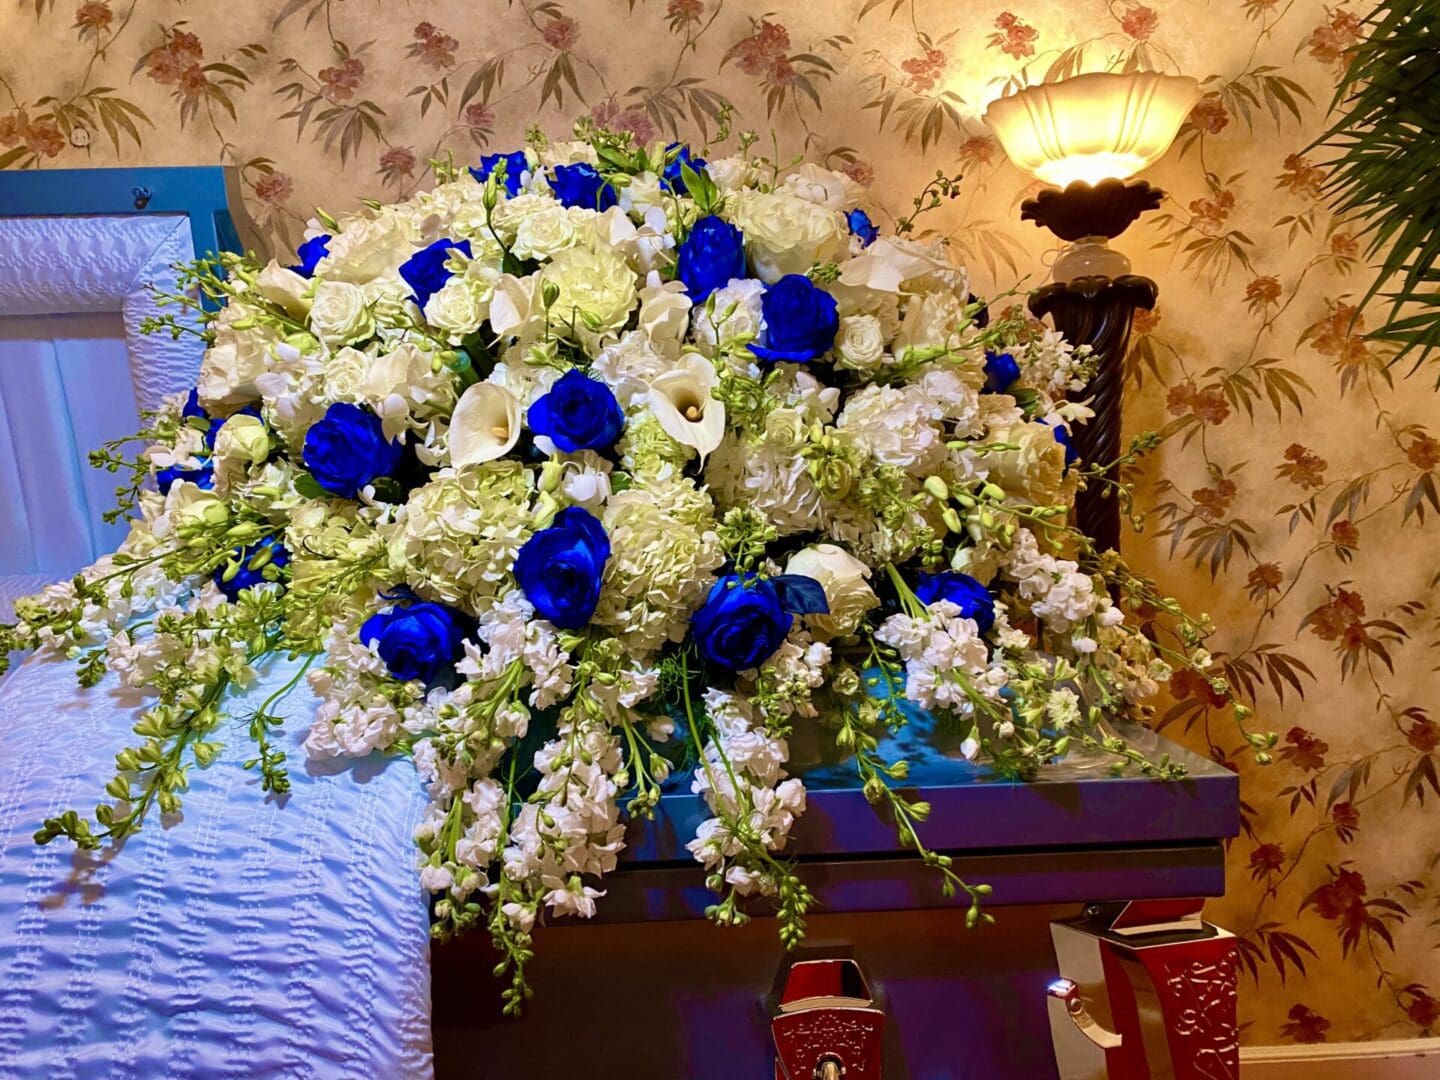 Blue Sky Casket and White Flowers